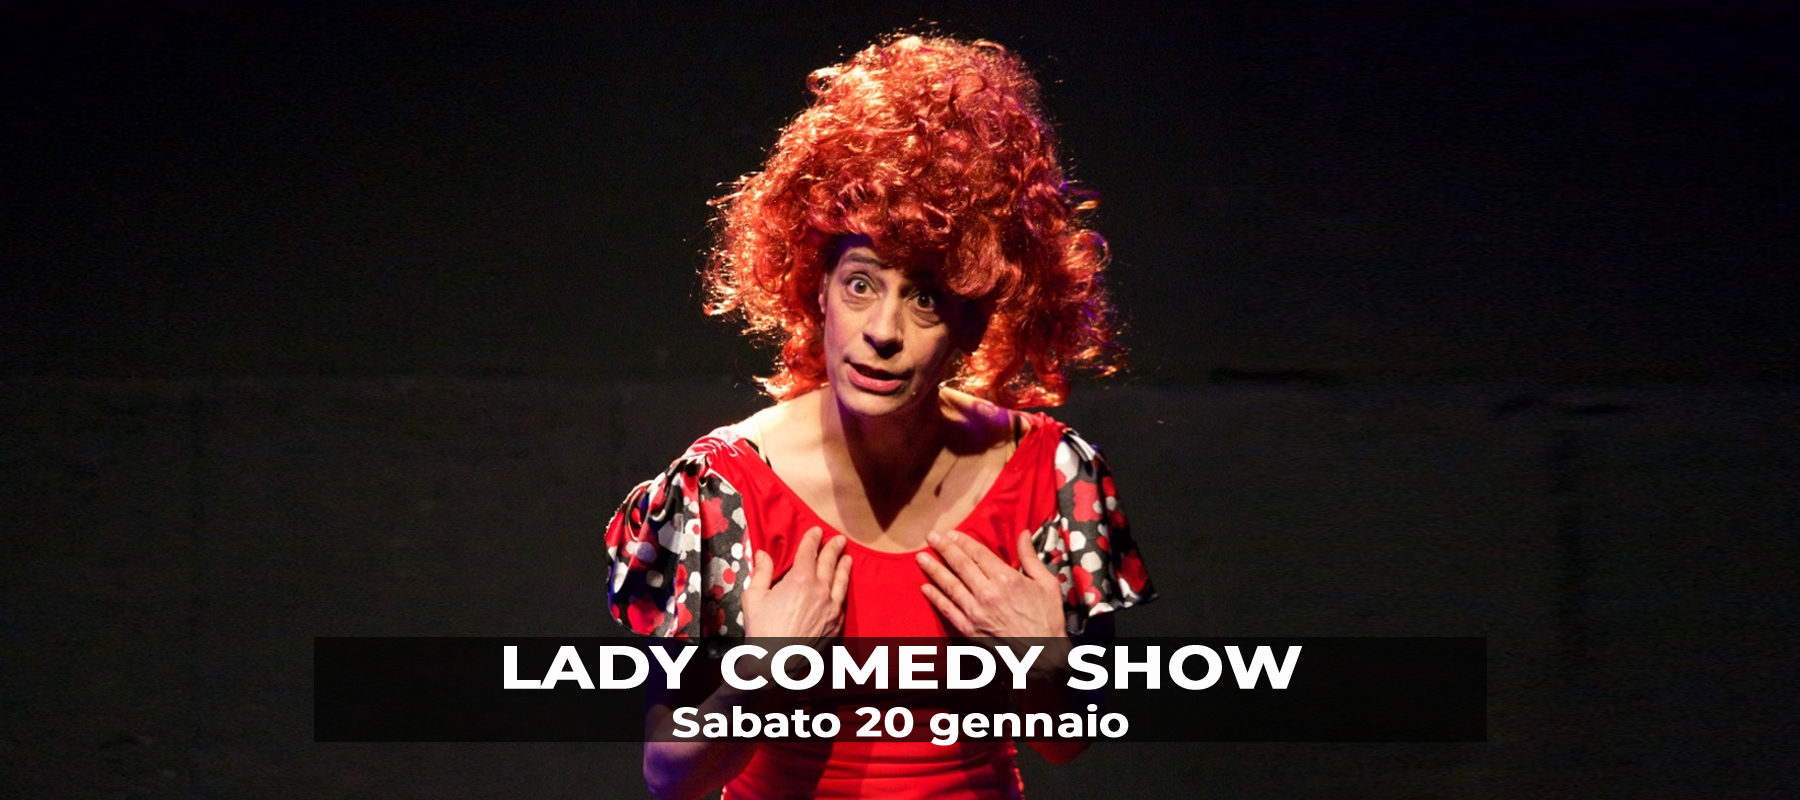 Lady Comedy Show